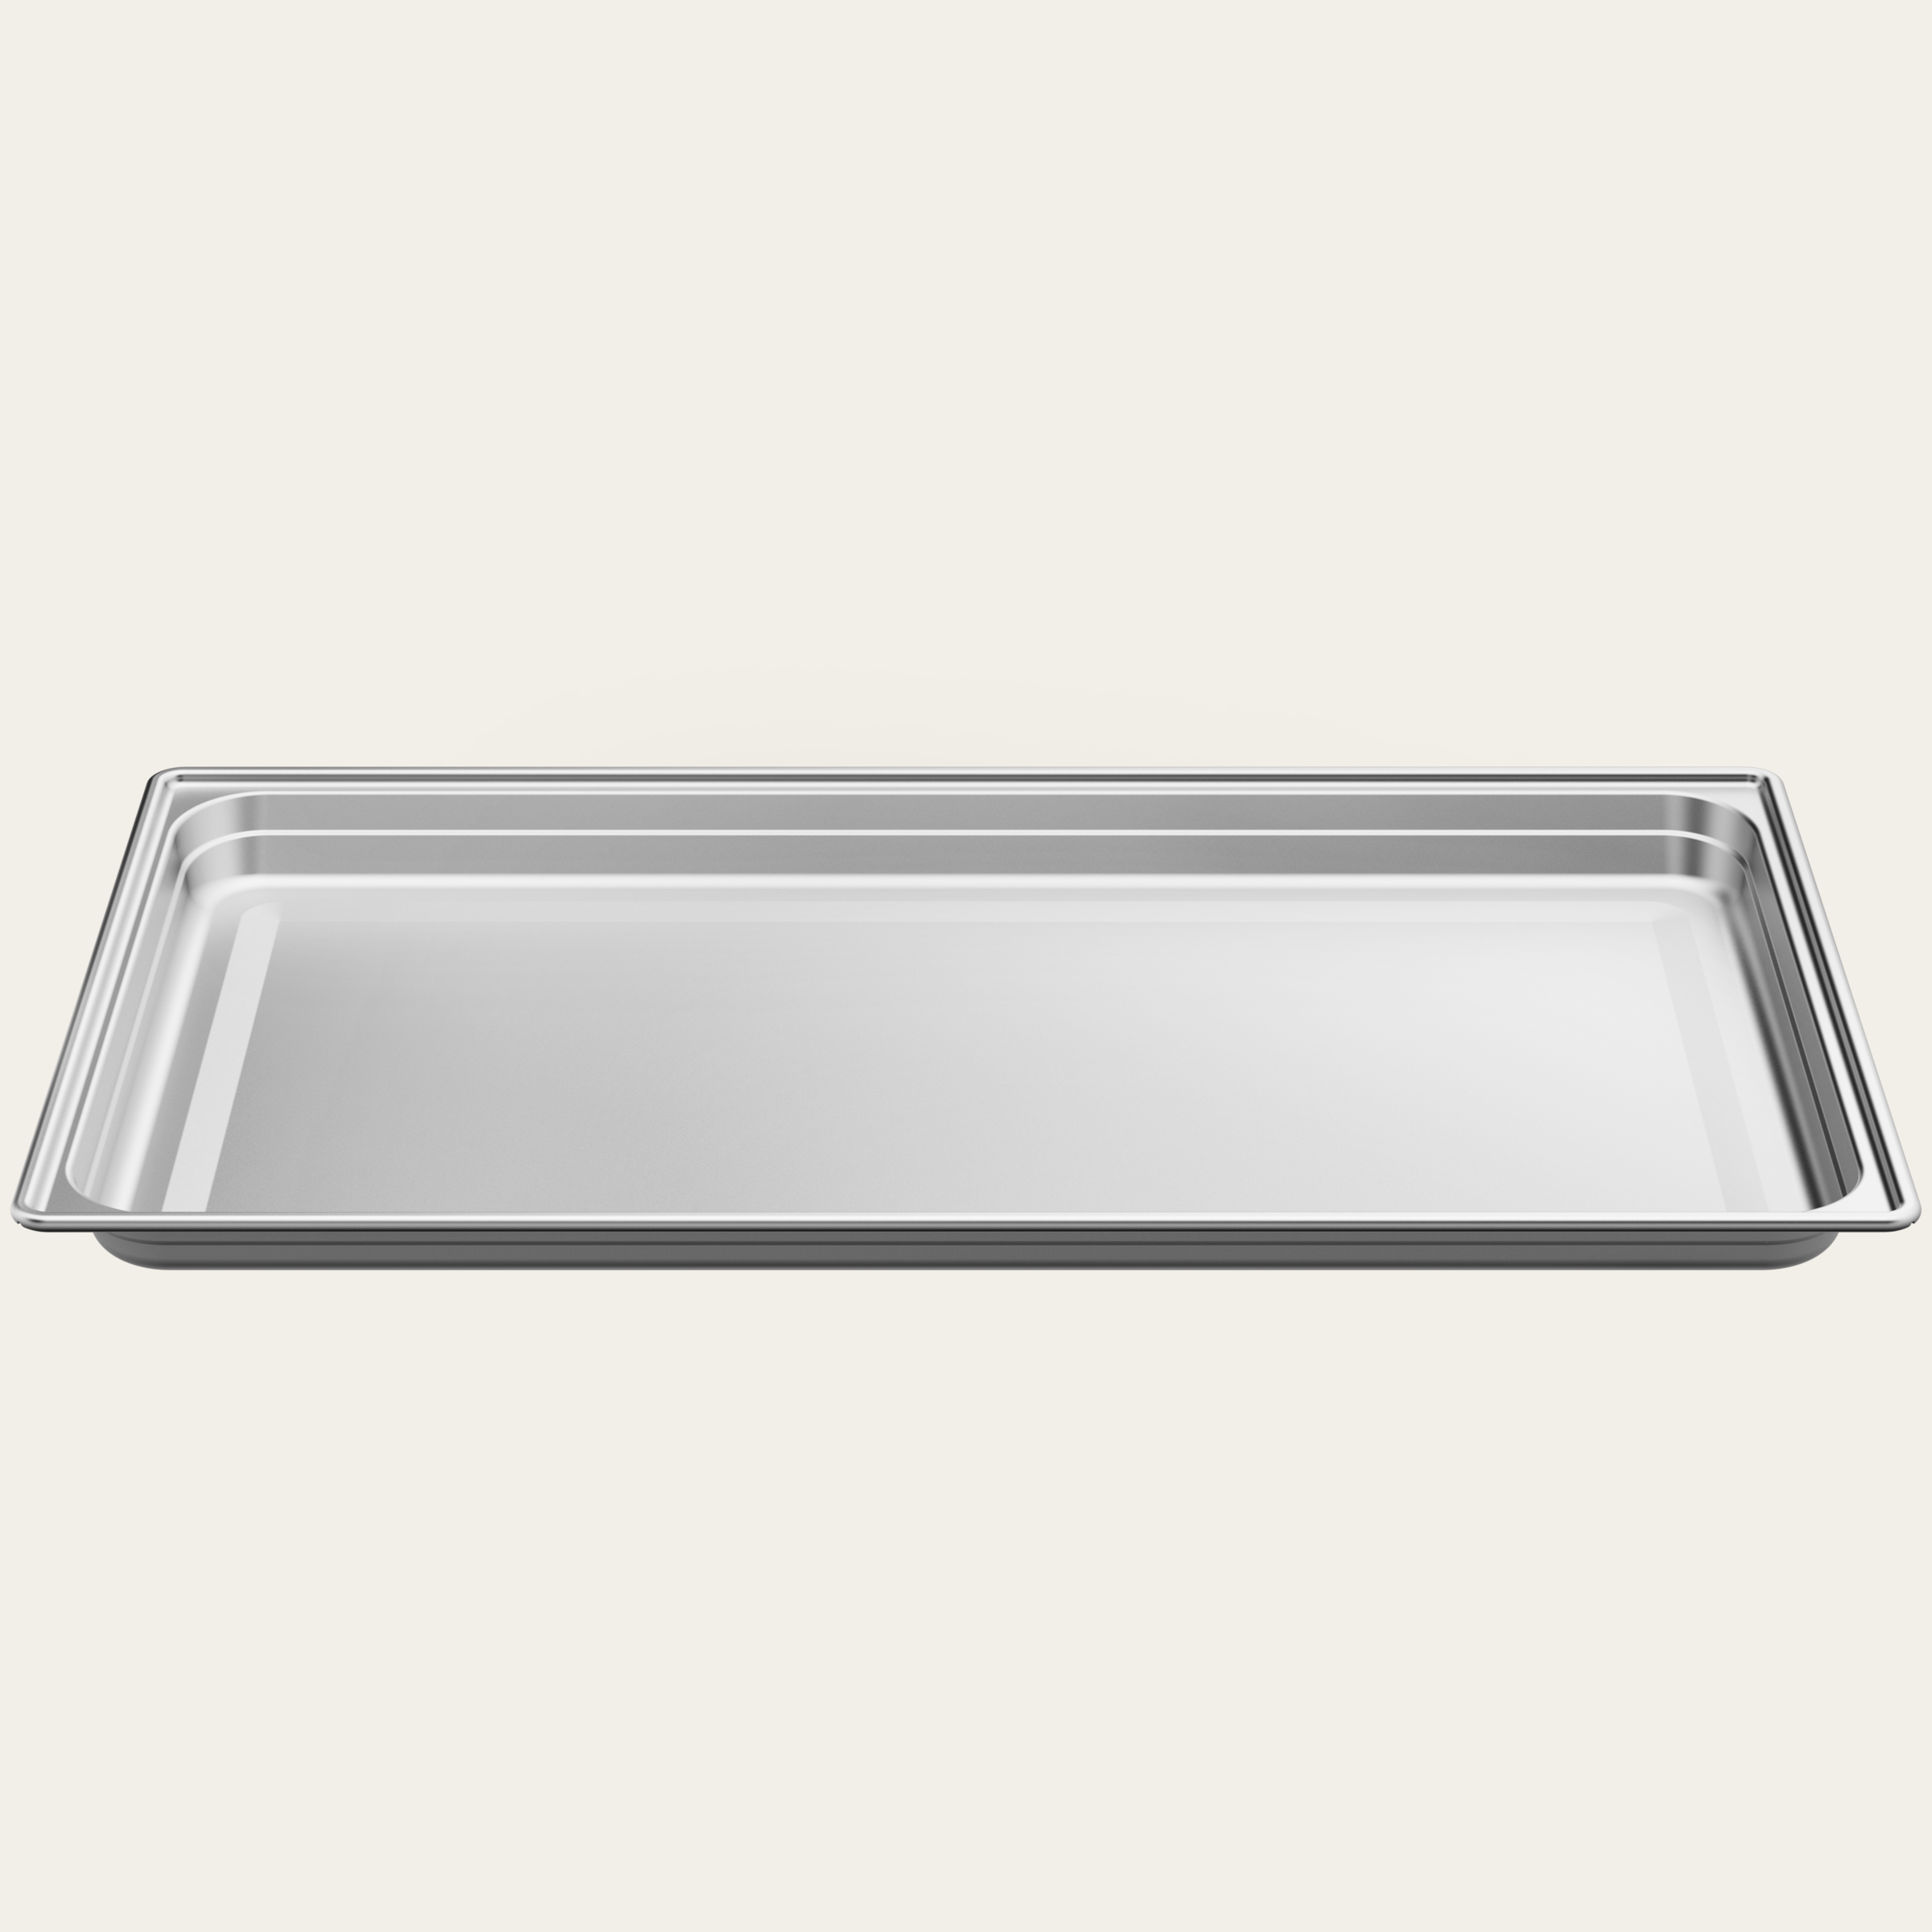 Stainless steel tray unperforated, 629 x 370 x 28 mm